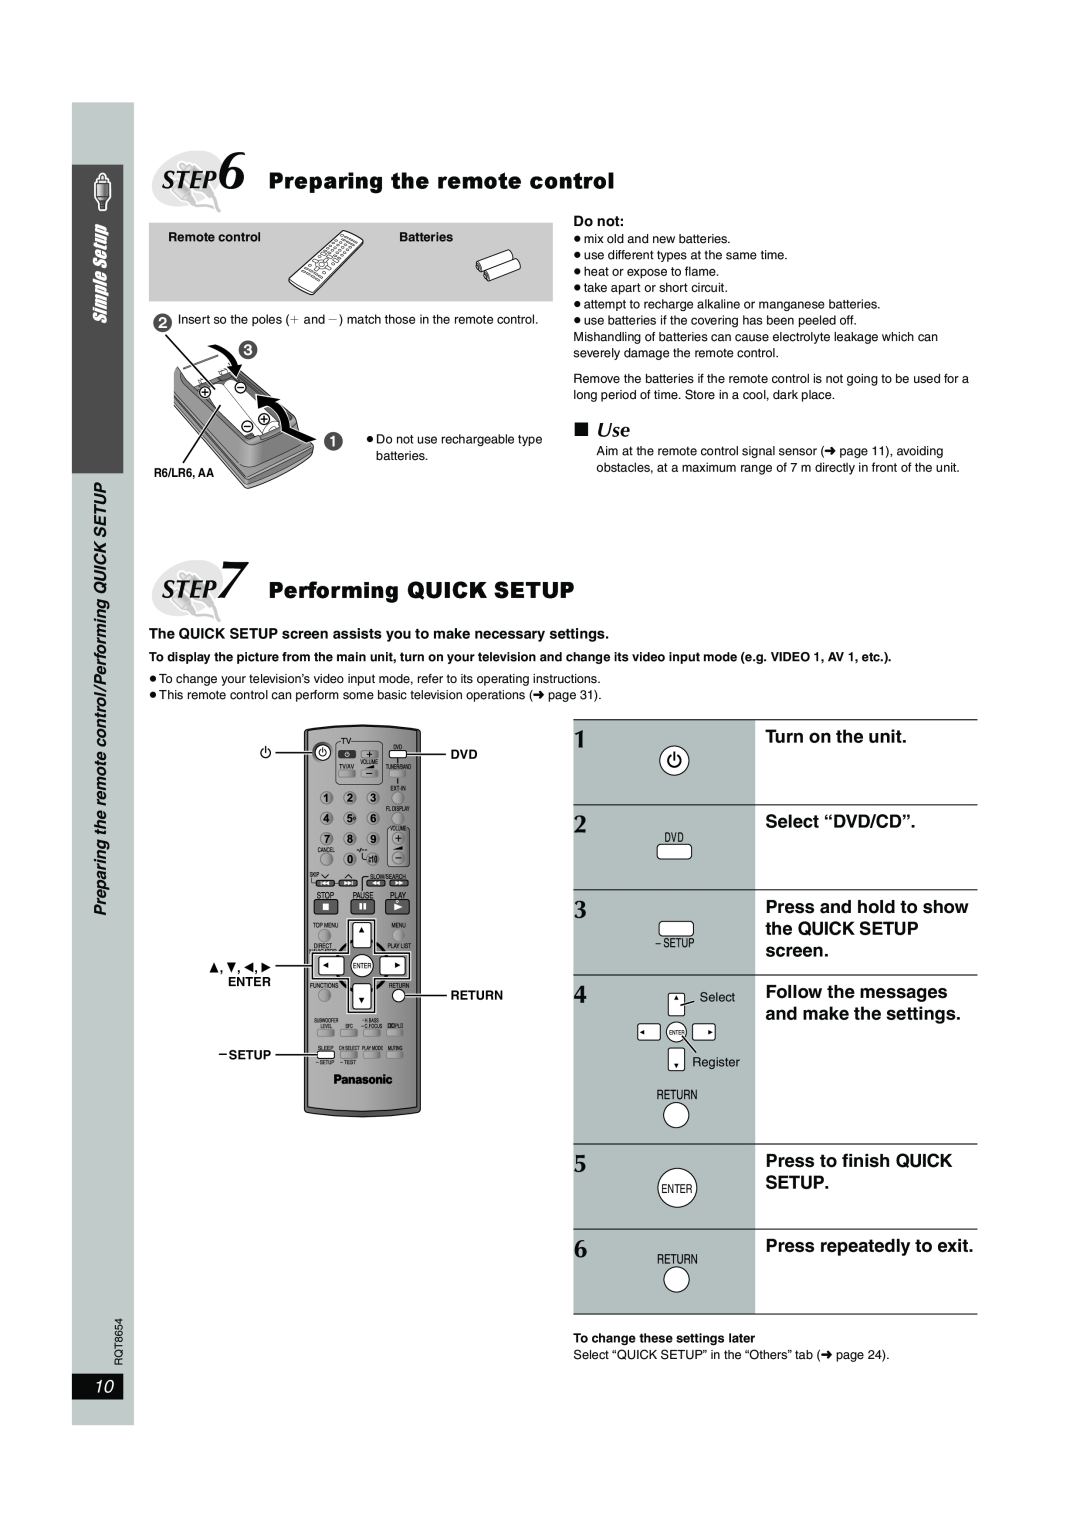 Panasonic SC-HT545W Preparing the remote control, Performing QUICK SETUP, Use, Turn on the unit, Select “DVD/CD”, screen 